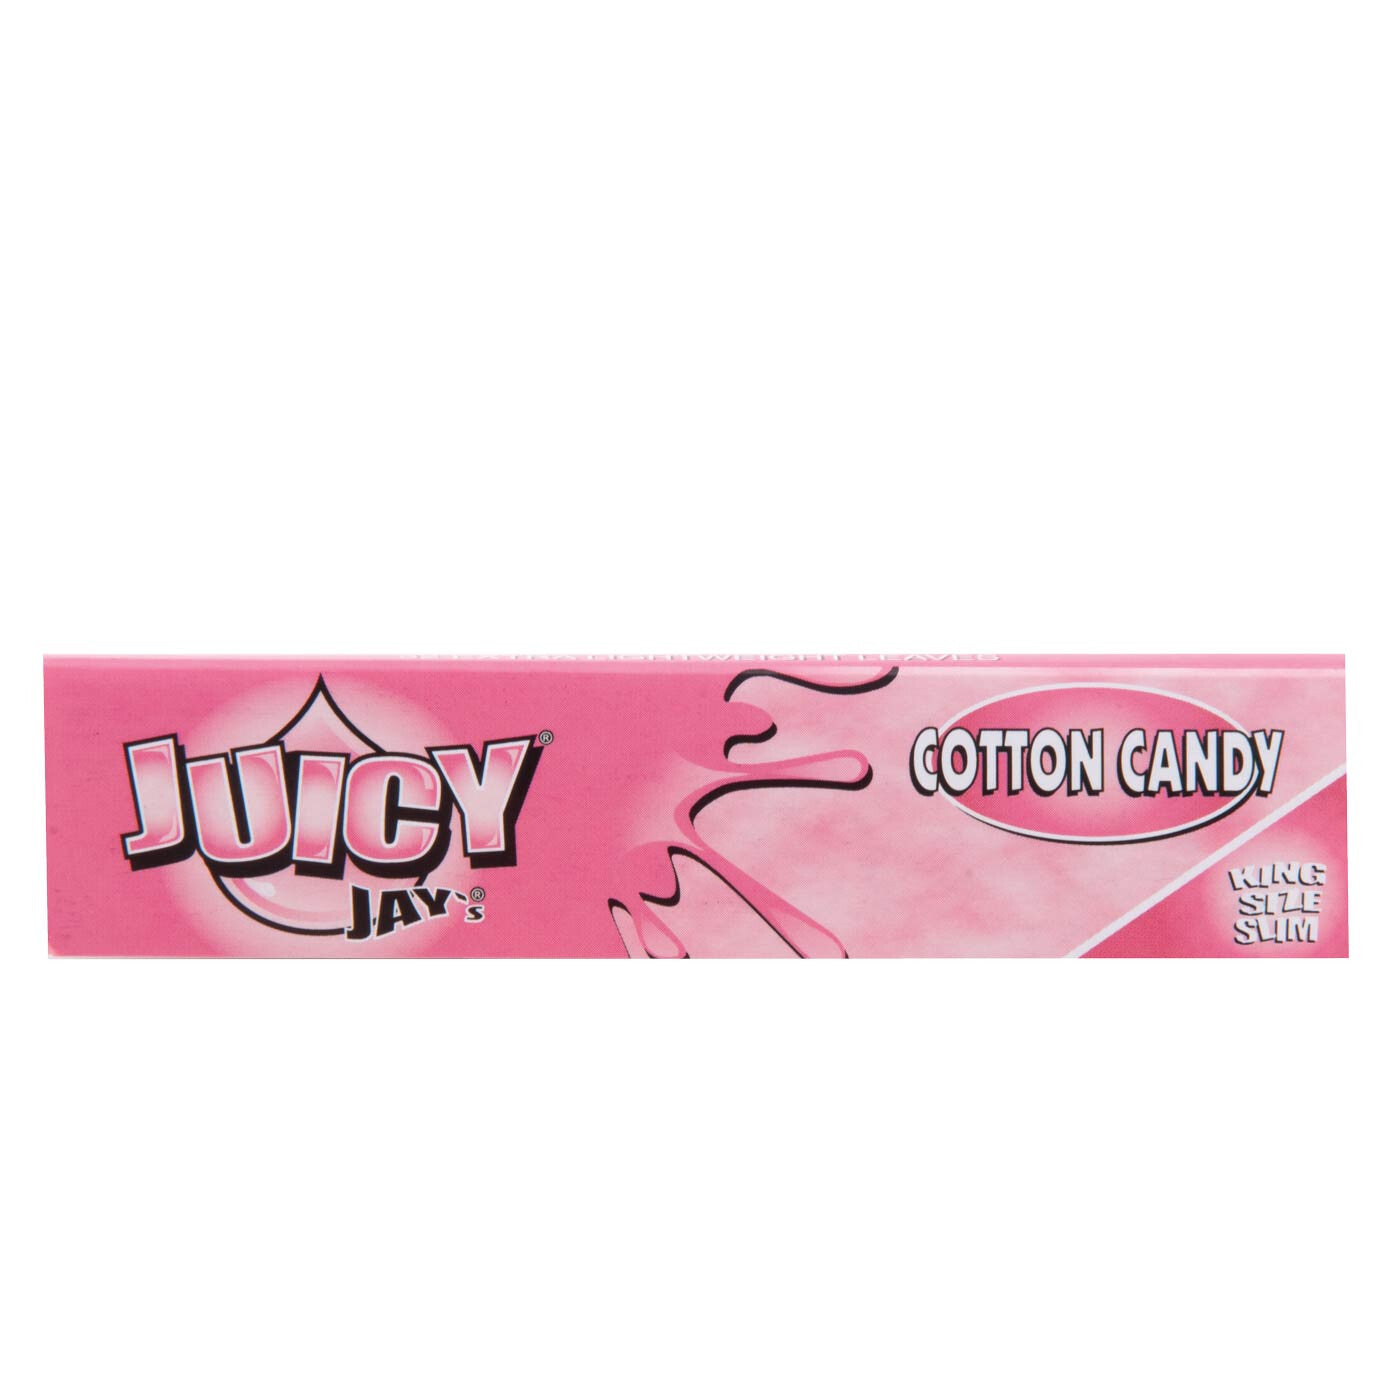 Juicy Jays Cotton Candy Kss 1 PC voorkant